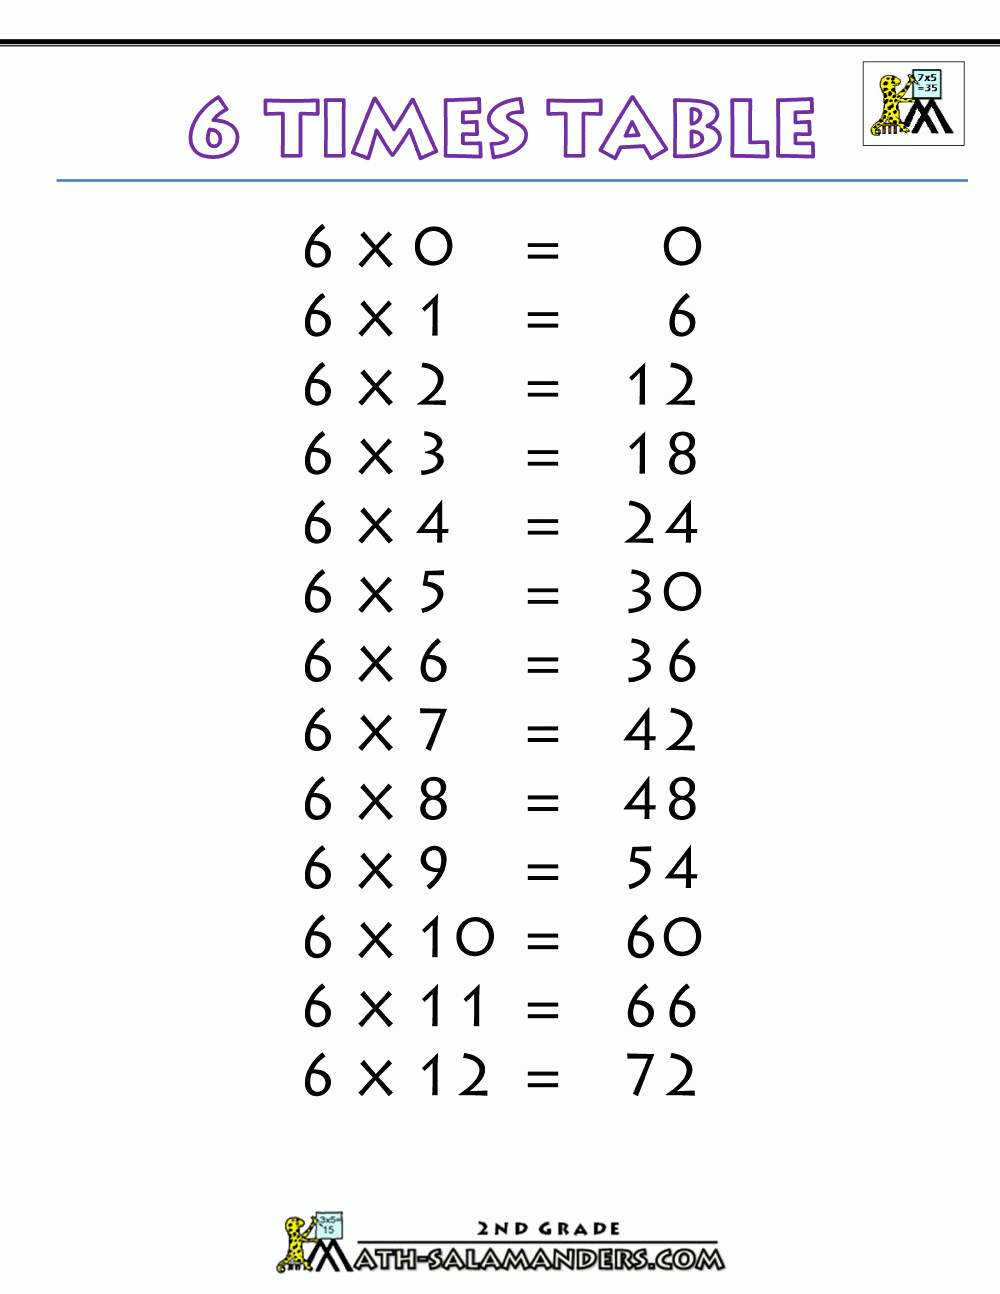 6 Times Table in Multiplication Worksheets 6 Times Tables